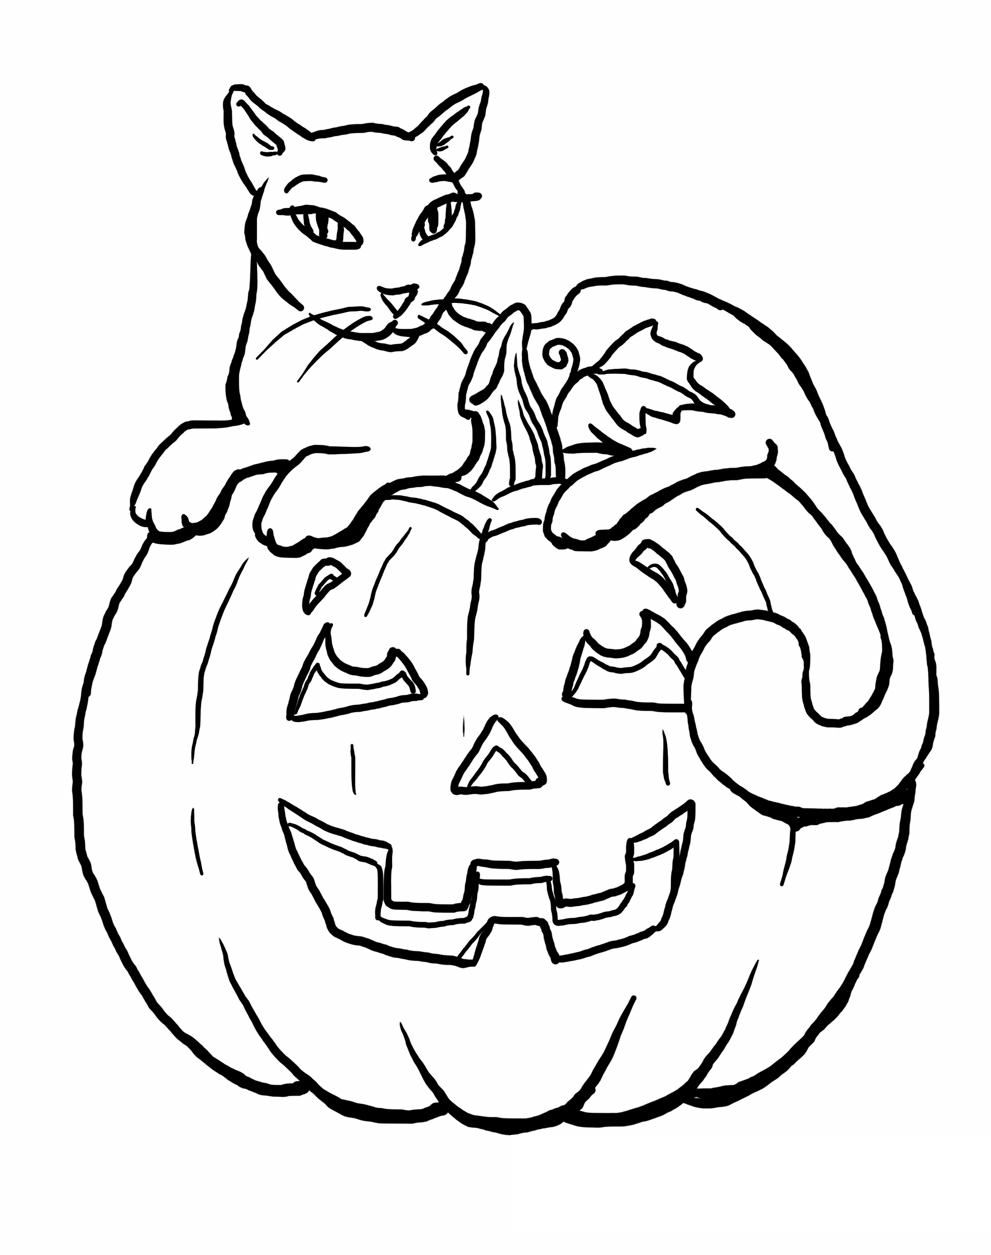 Halloween Cat With Pumpkin Coloring Pages | Coloring